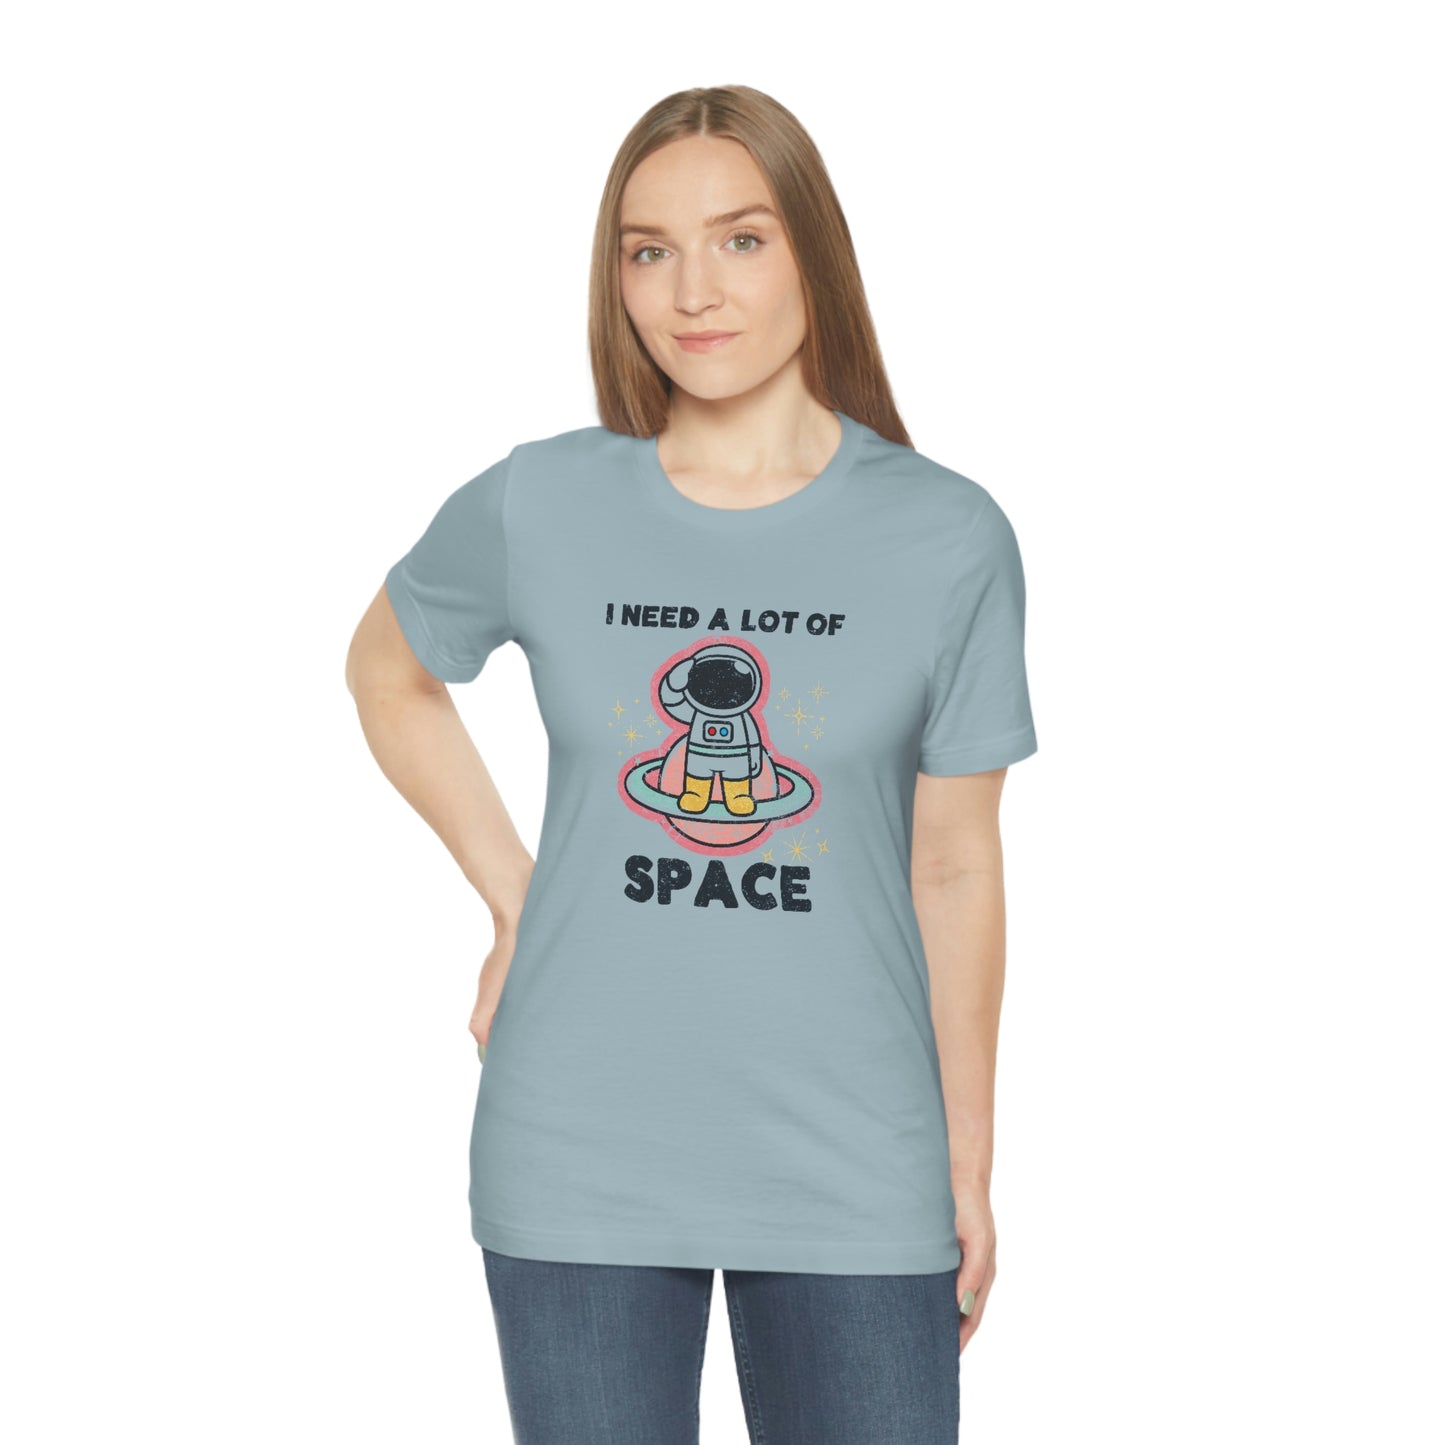 "I need a lot of Space" Bella Canvas Unisex Jersey Short Sleeve Tee